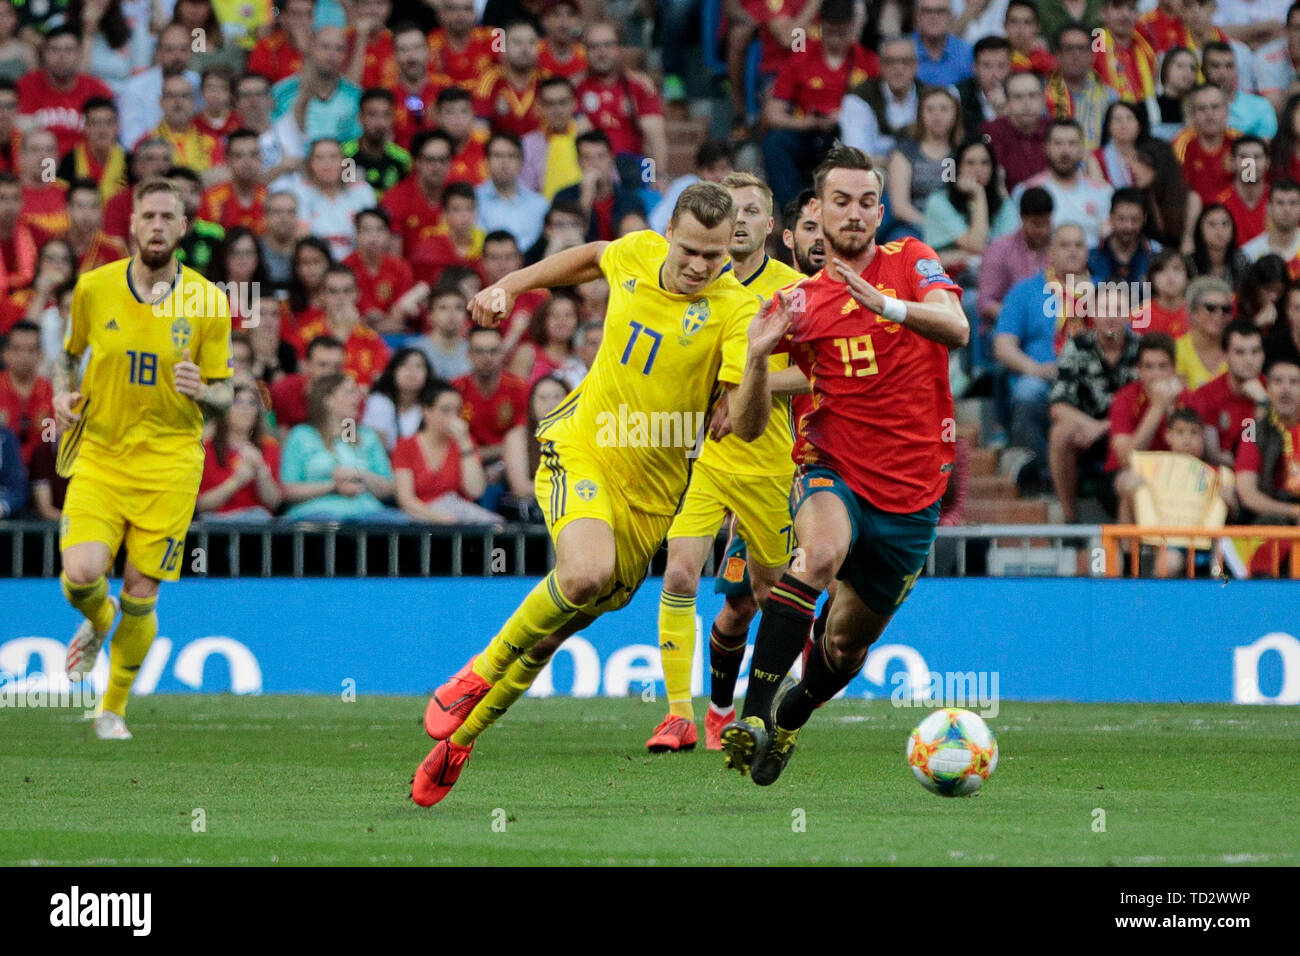 Spain national team player Fabian Ruiz and Sweden national team player Viktor Claesson seen in action during the UEFA EURO 2020 Qualifier match between Spain and Sweden at Santiago Bernabeu Stadium in Madrid. Final score: Spain 3 - Sweden 0 Stock Photo